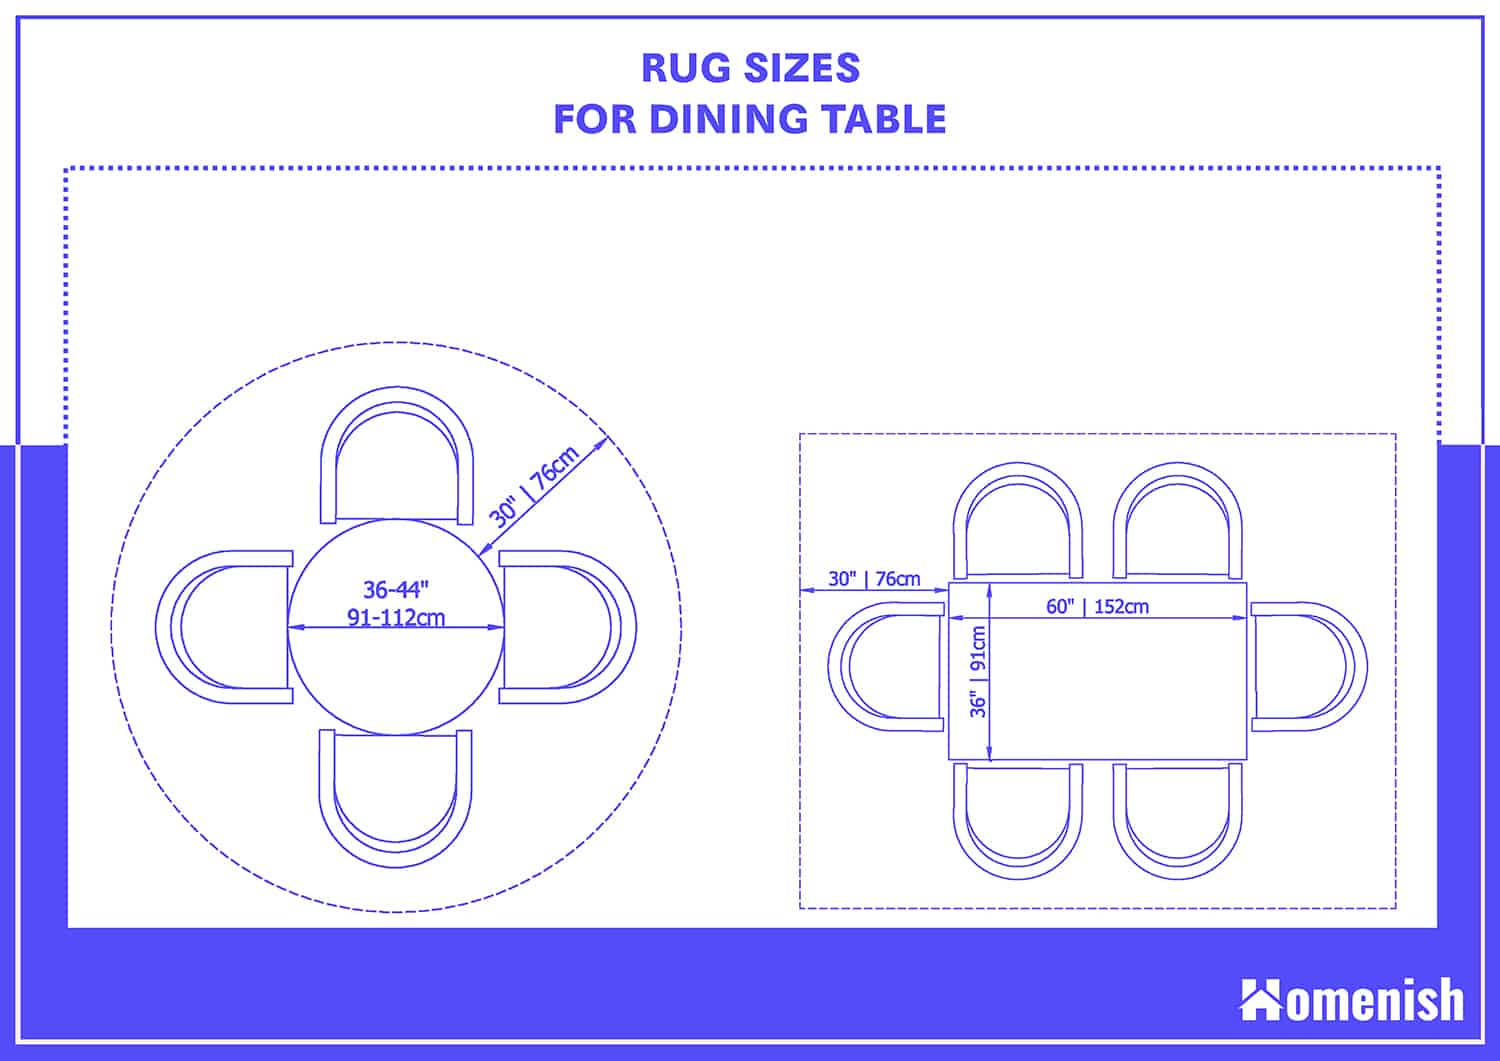 Standard Dining Table Dimensions Sizes With 9 Detailed Diagrams Homenish